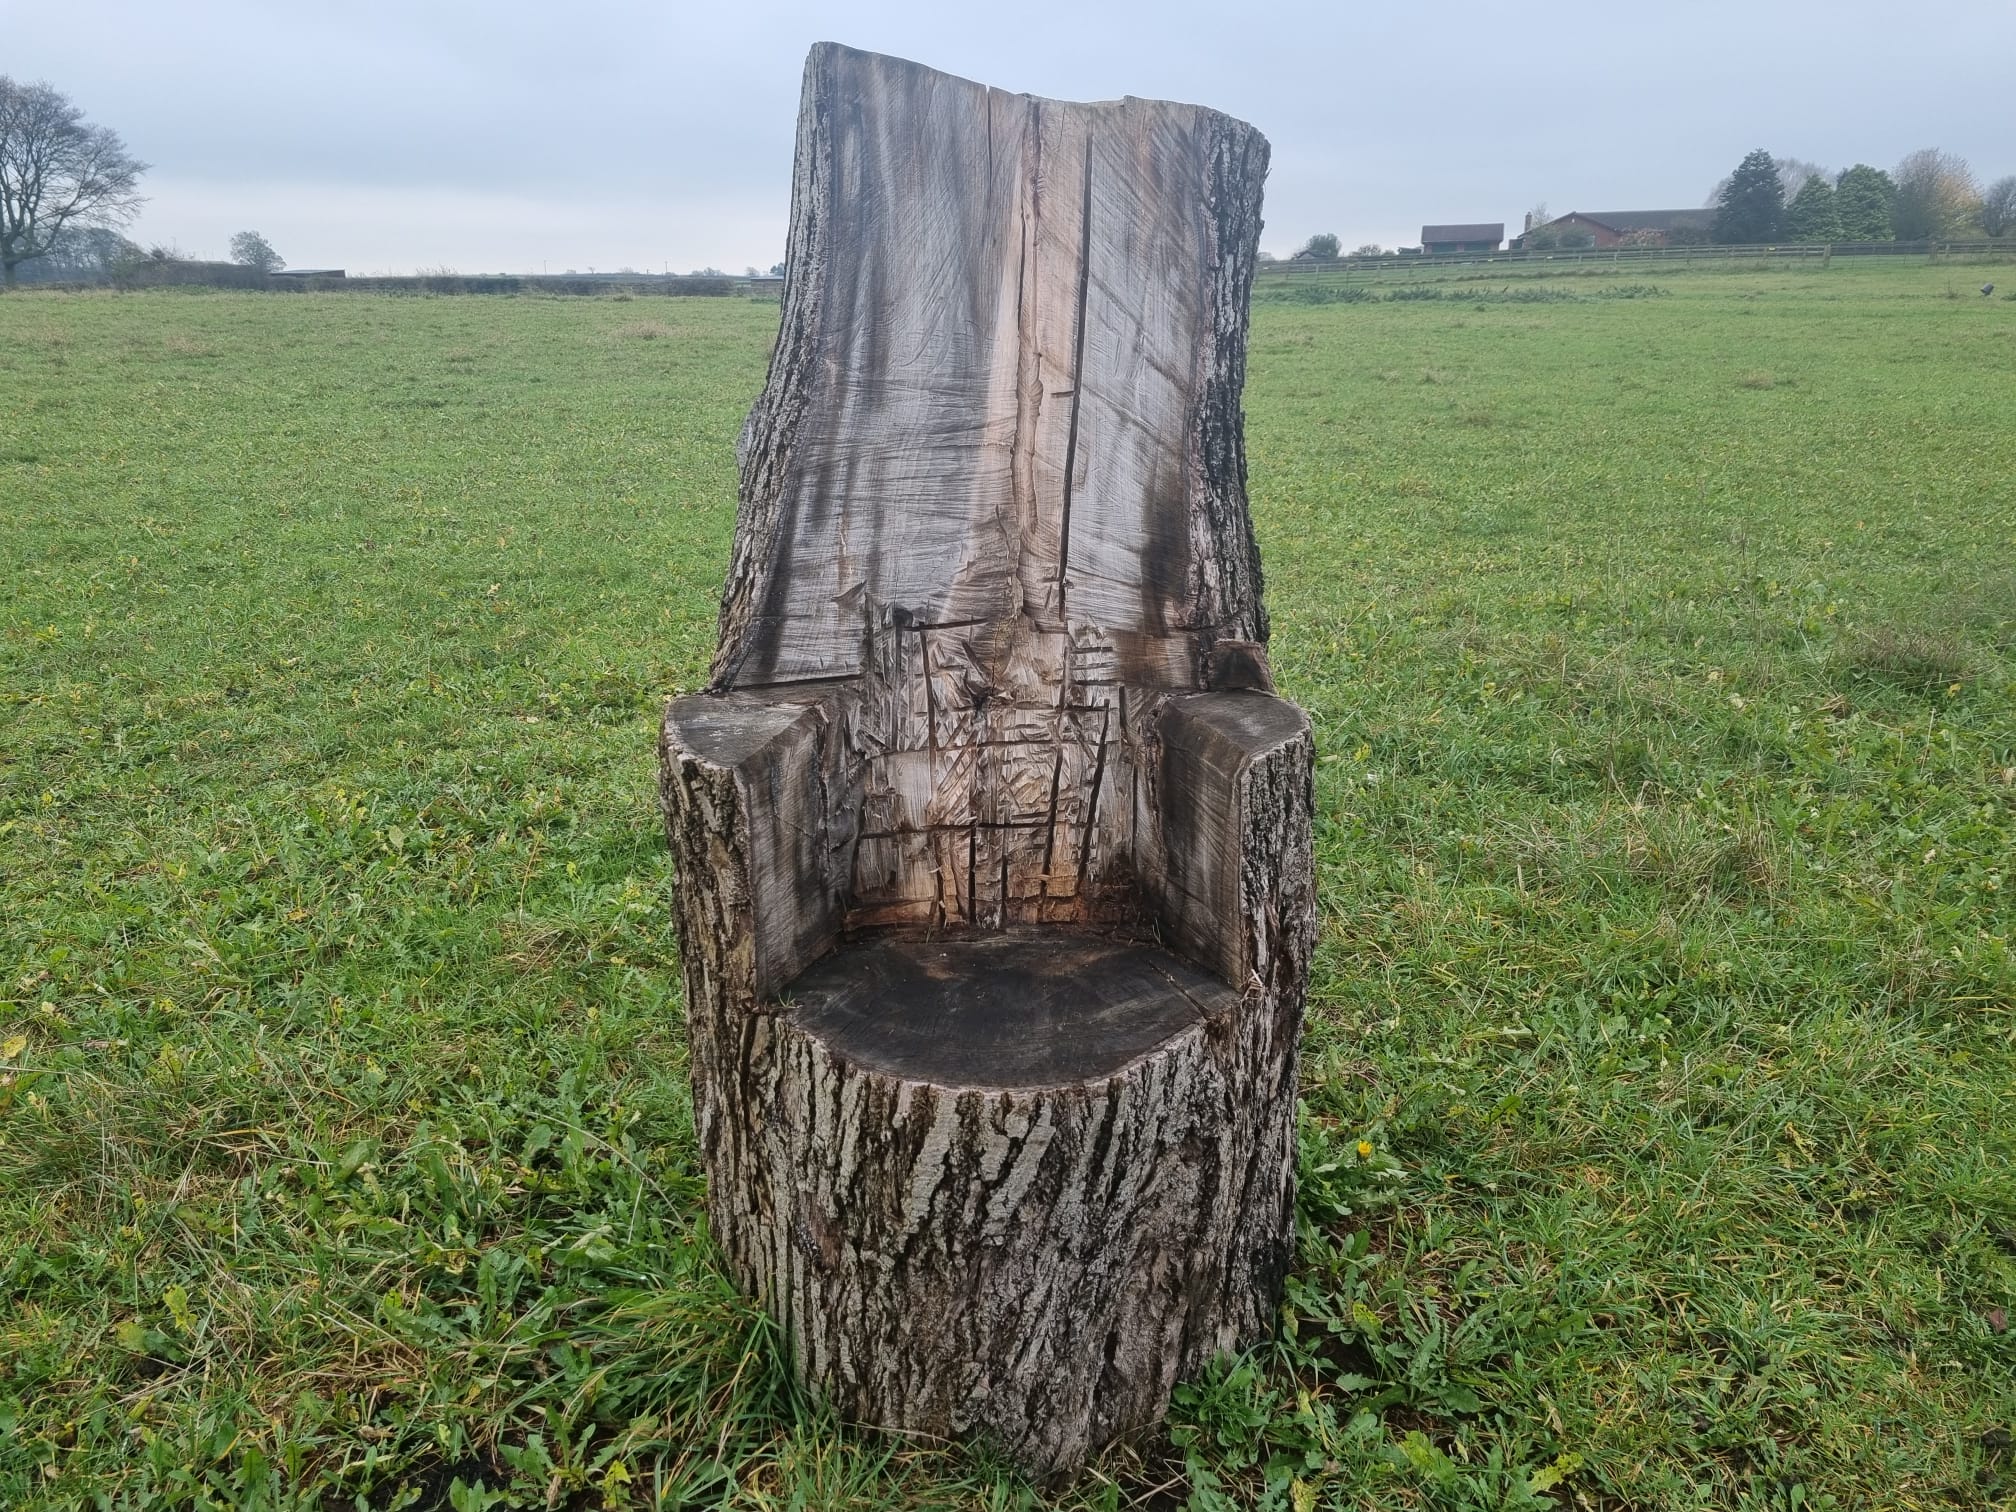 armchair/throne style seat carved out of an old tree trunk set in a field